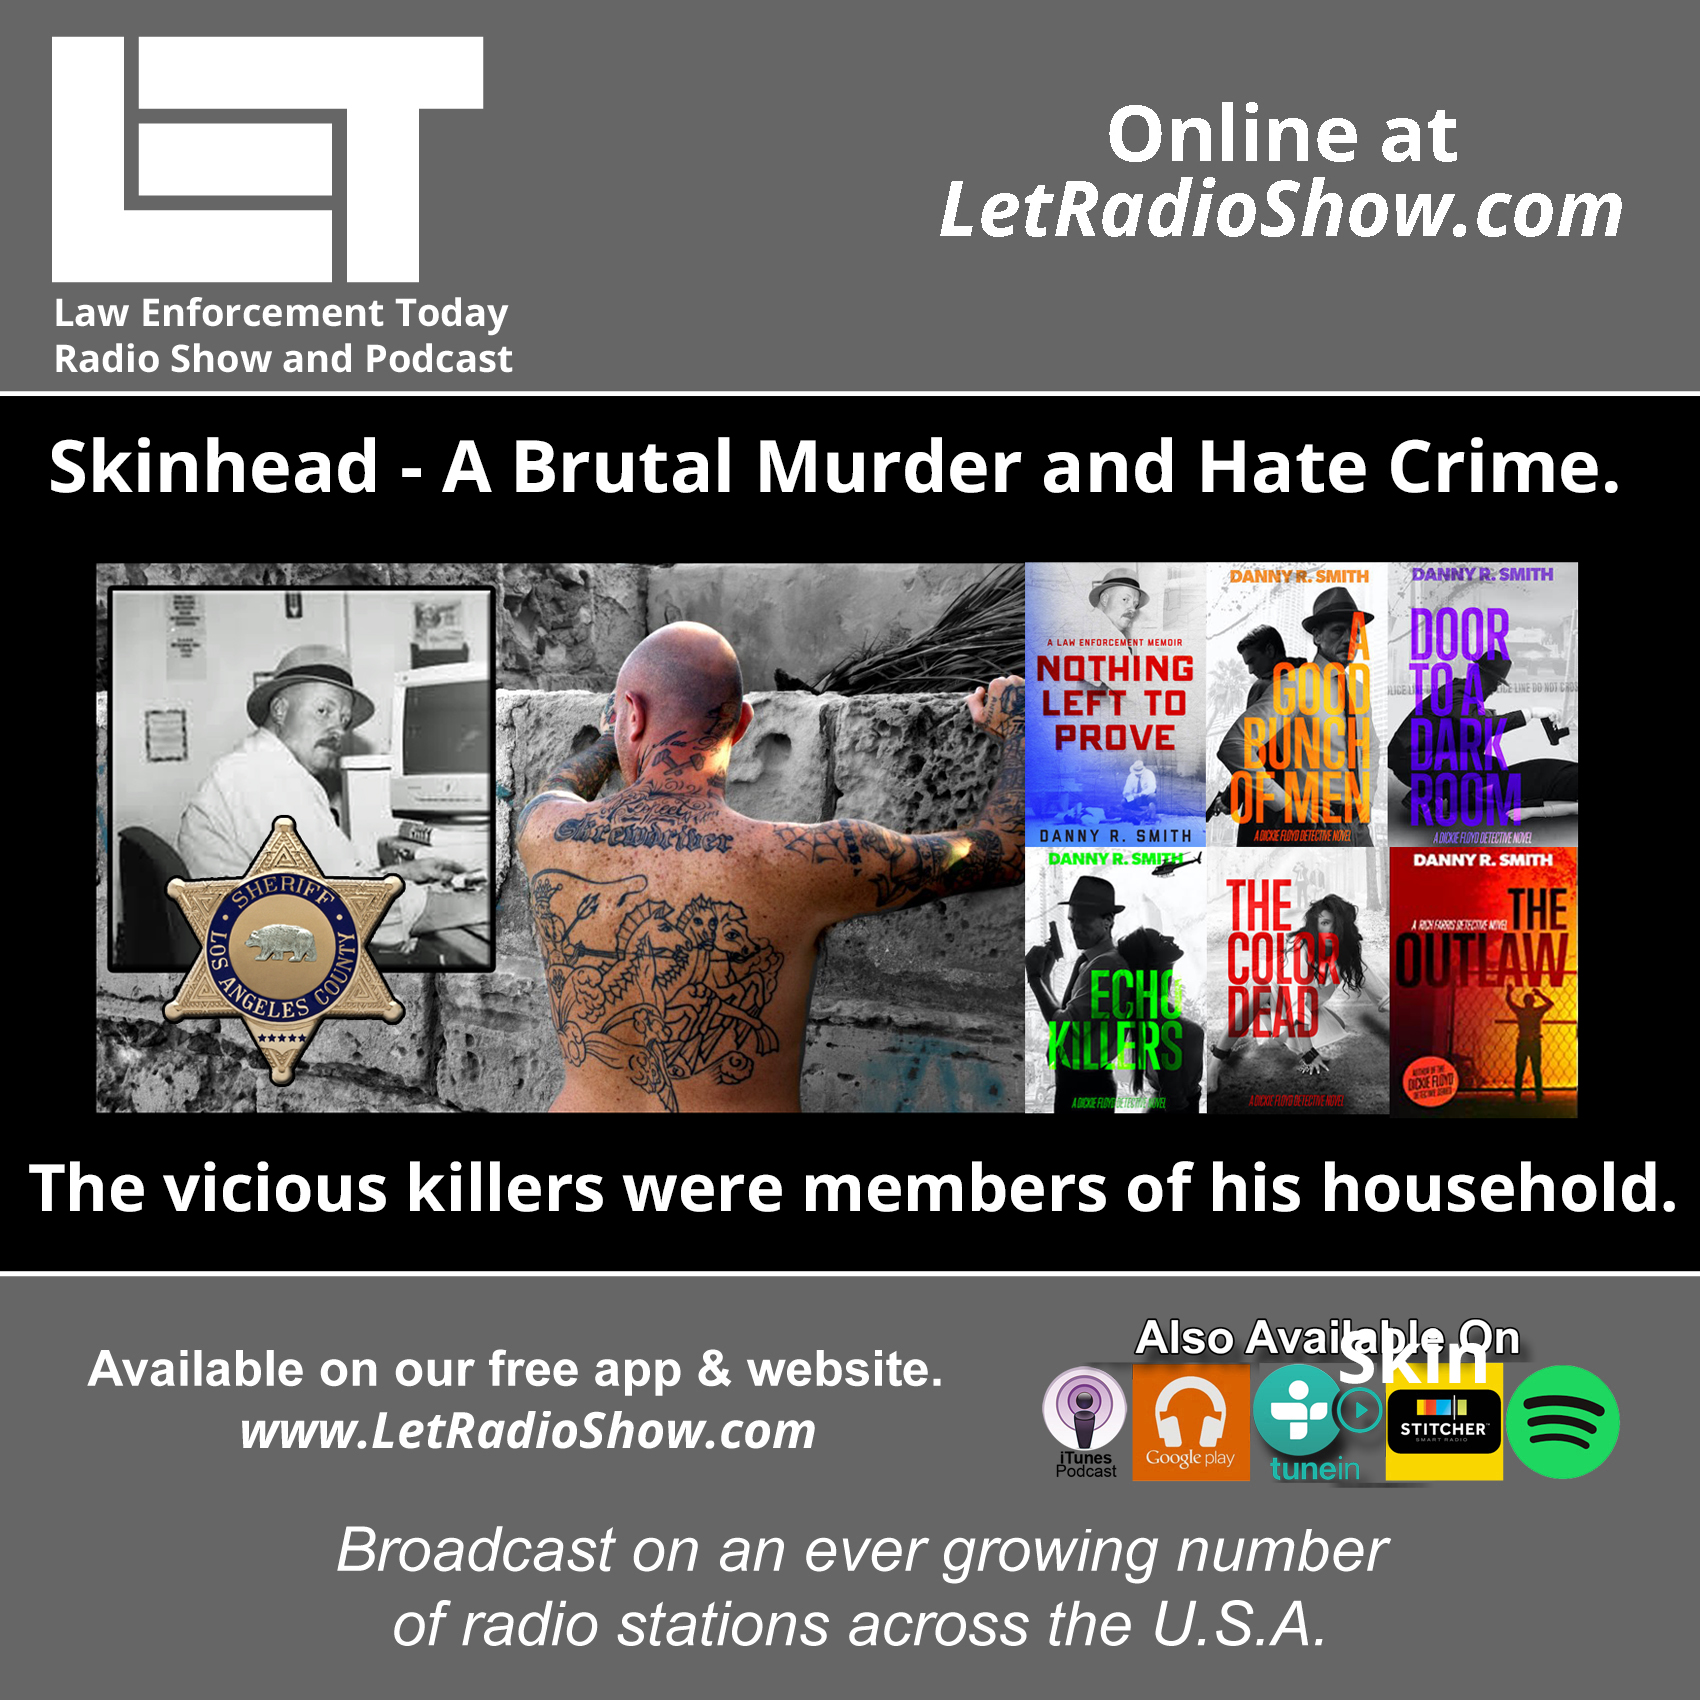 S5E69: Murder and Hate Crime. The killers were members of his household.